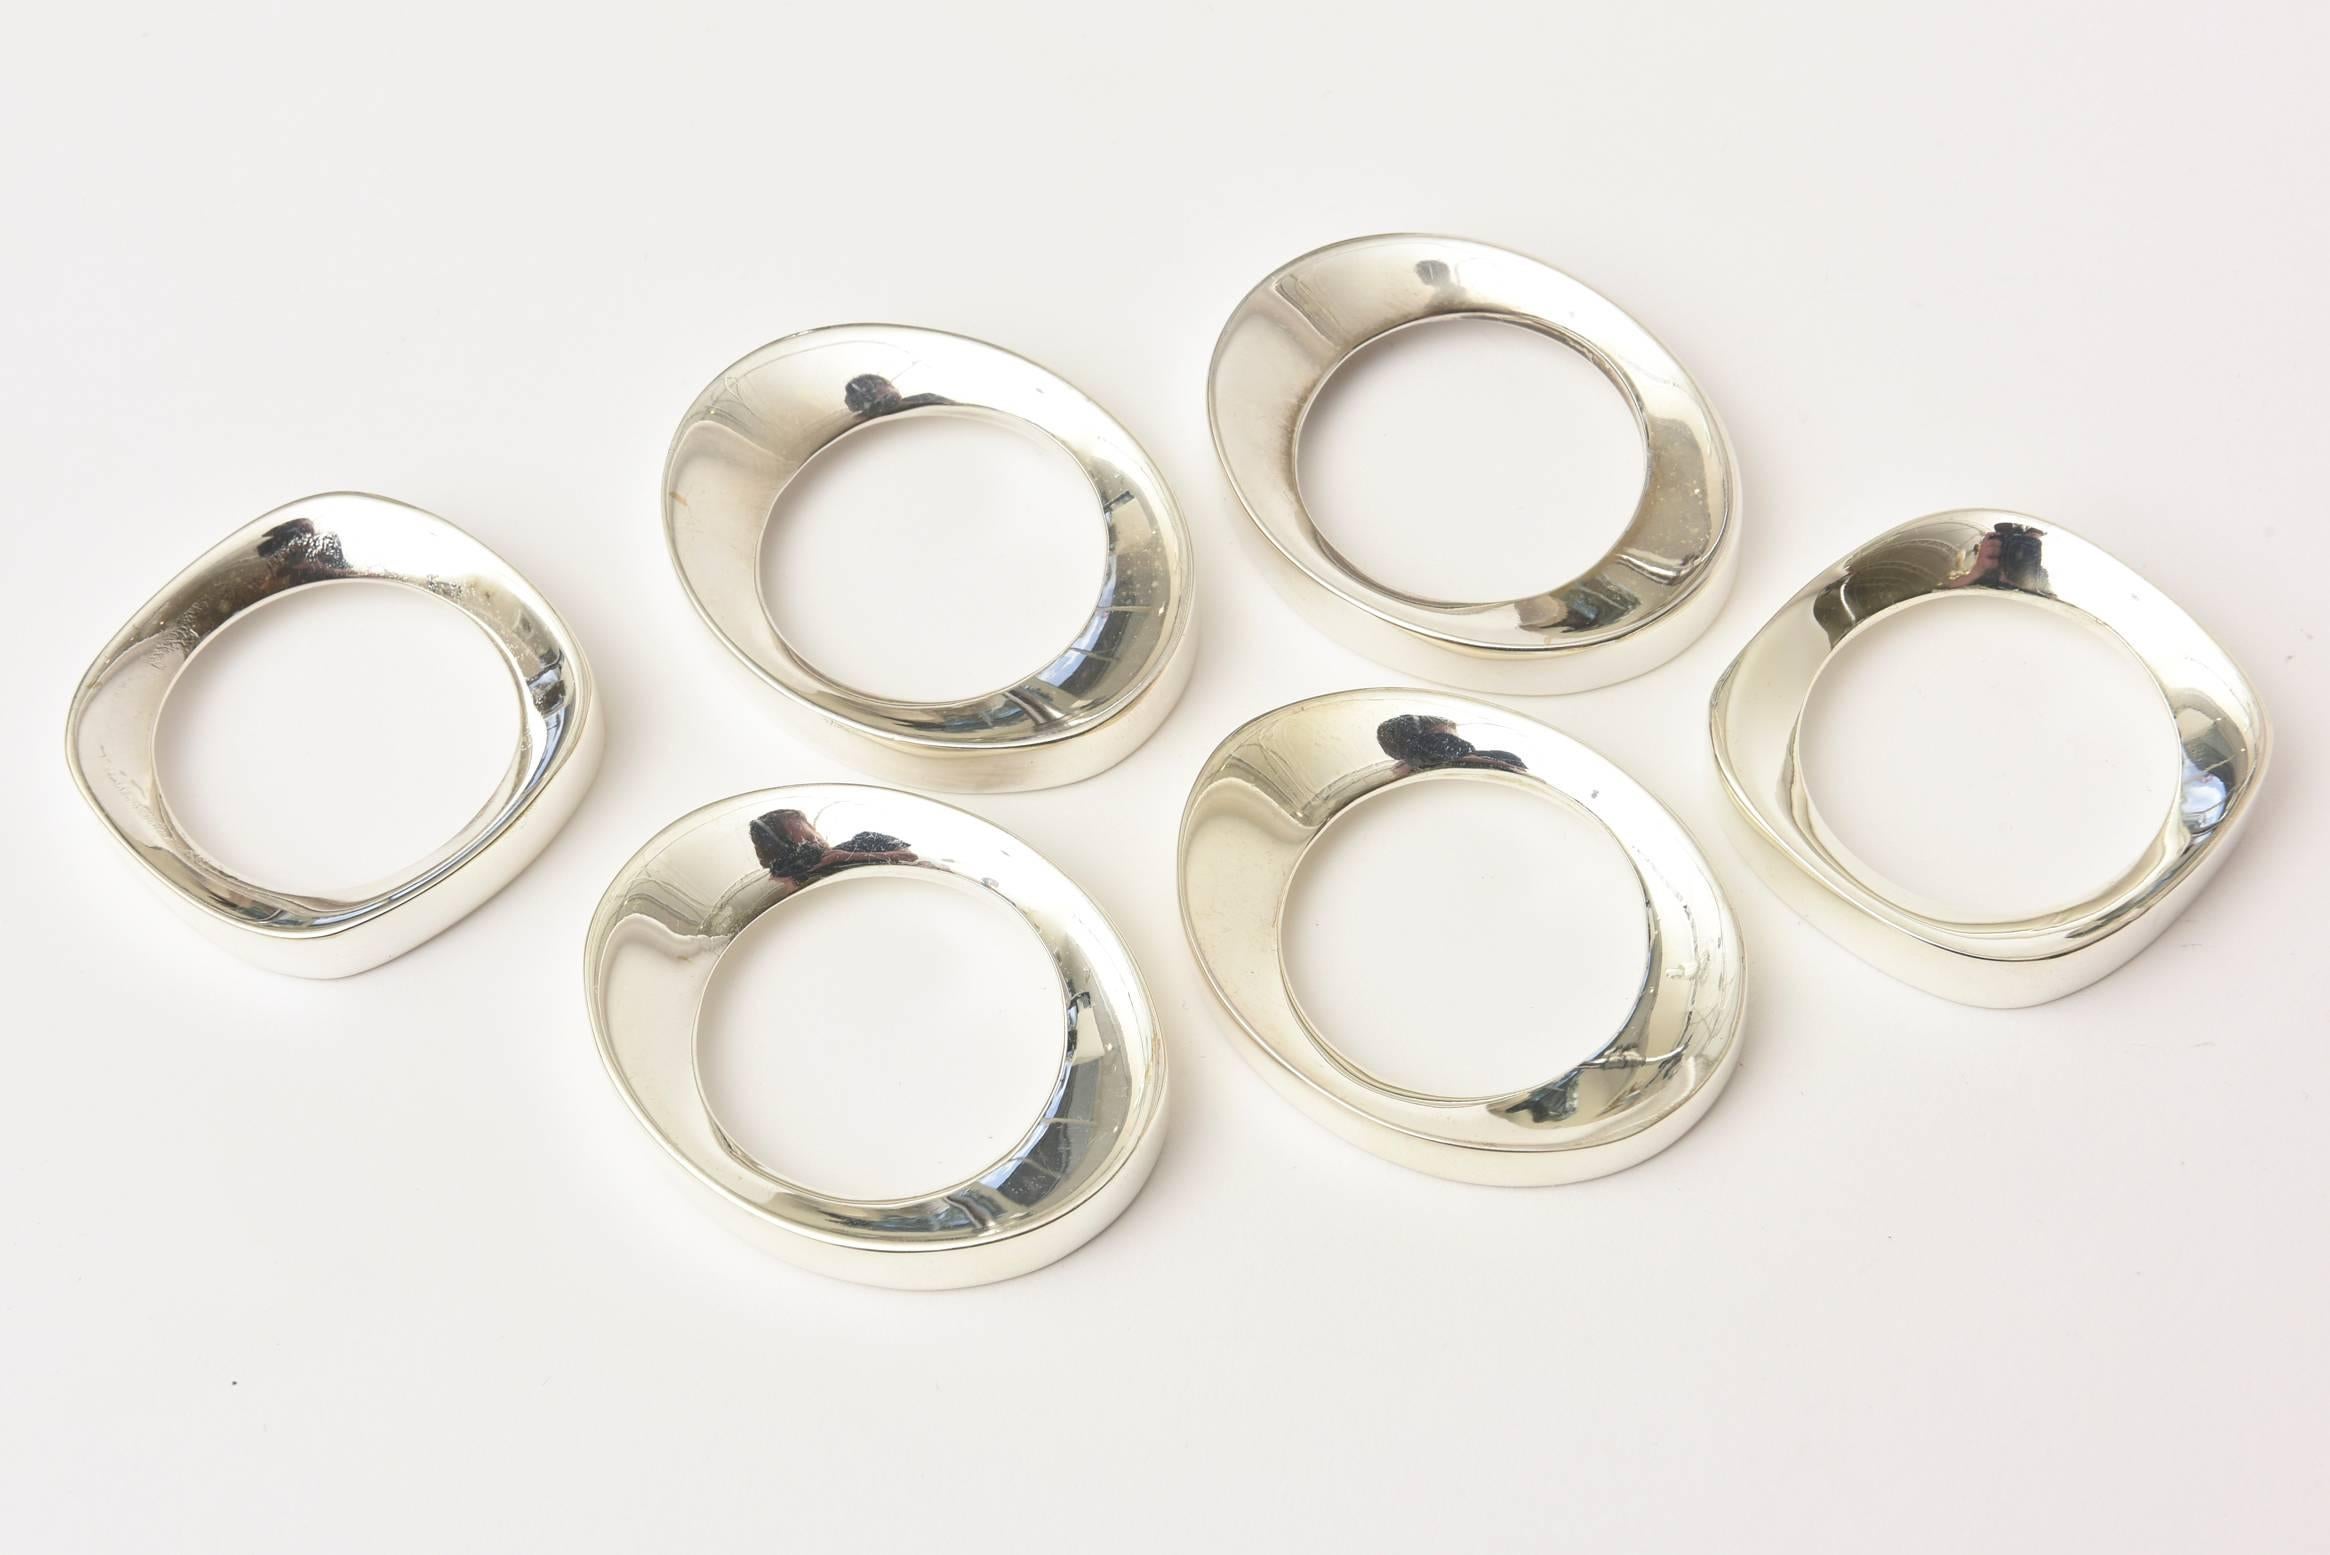 This set of six polished vintage silver plate sculptural napkin rings will set any table with elegance and modern elements. There are four of the same elliptical shape and two of another rounded square form. They have good weight to them and are